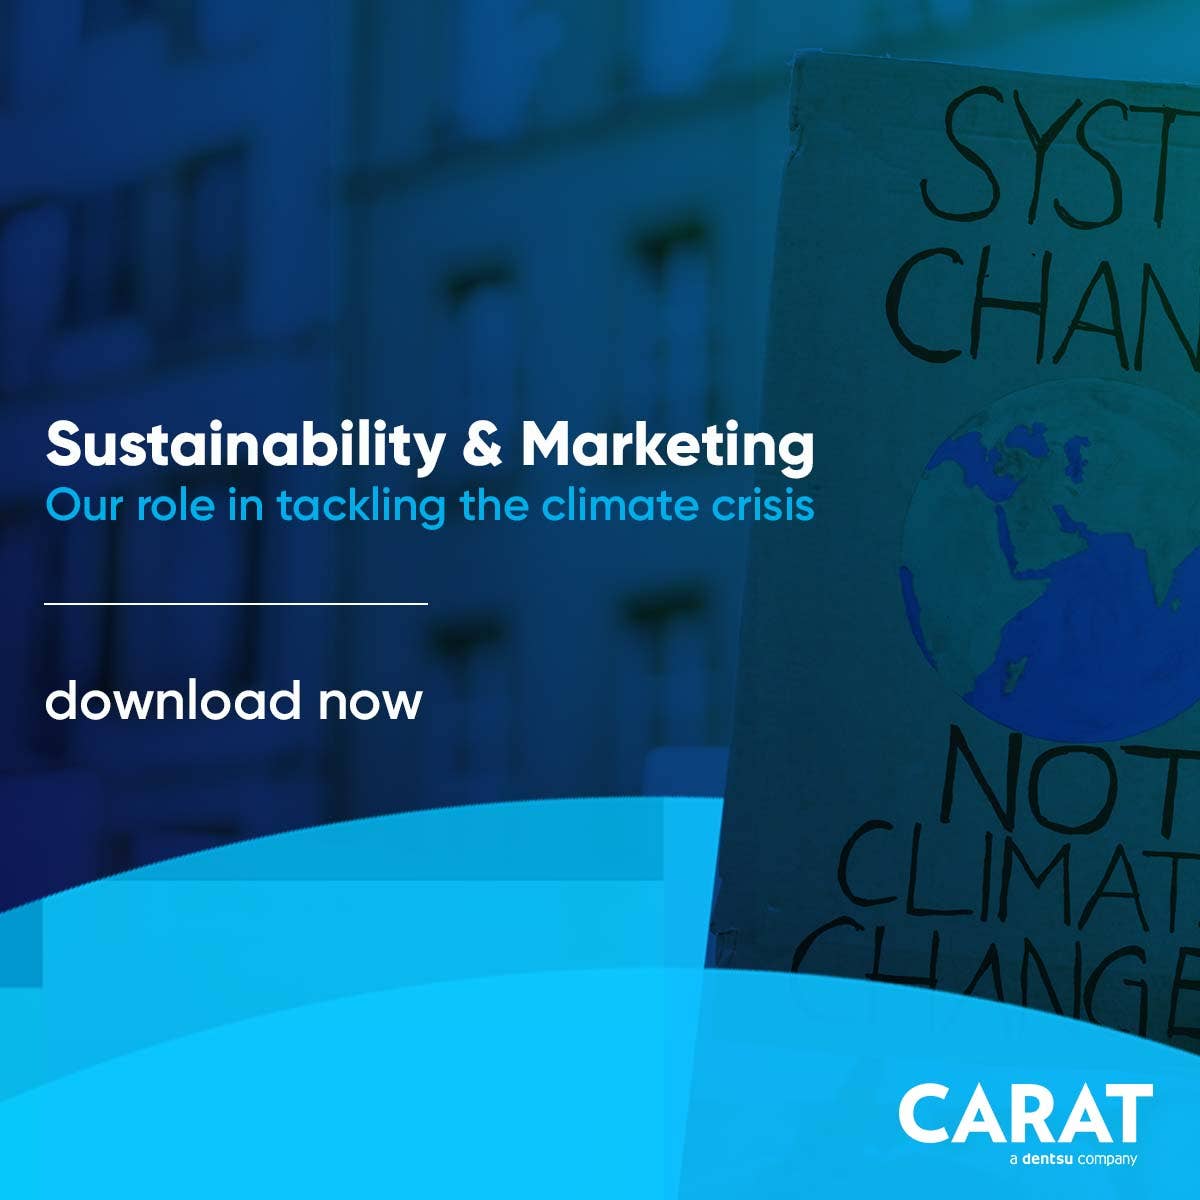 Sustainability & Marketing: Our role in tackling the climate crisis